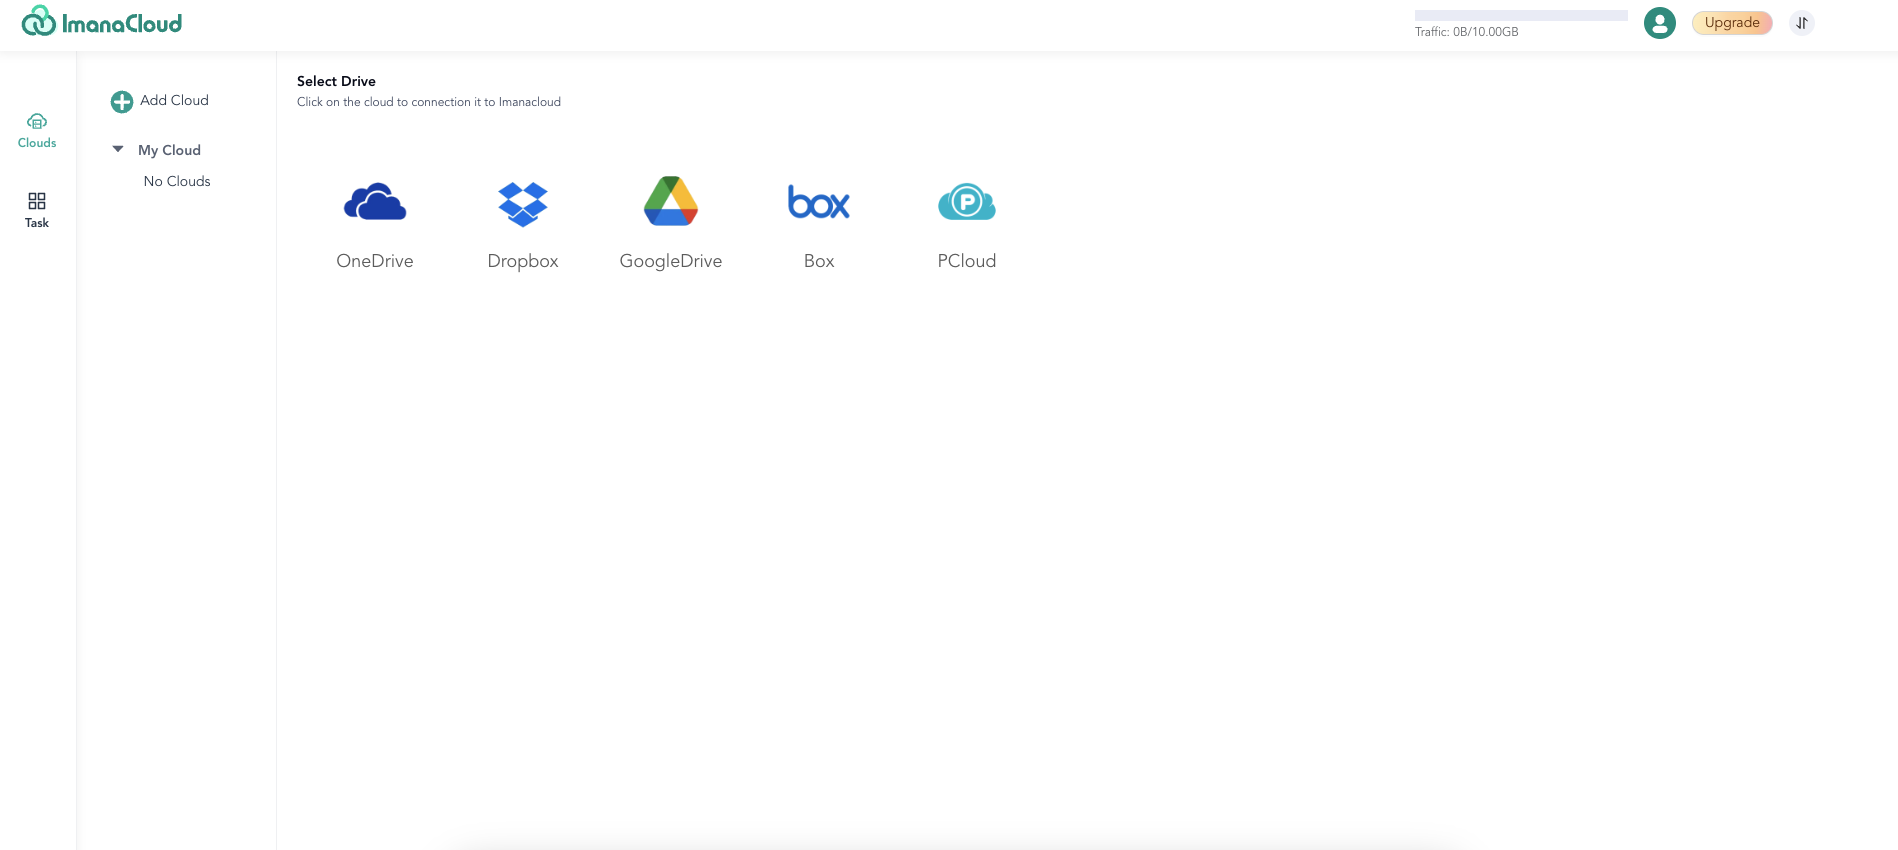 Add Google Drive And PCloud